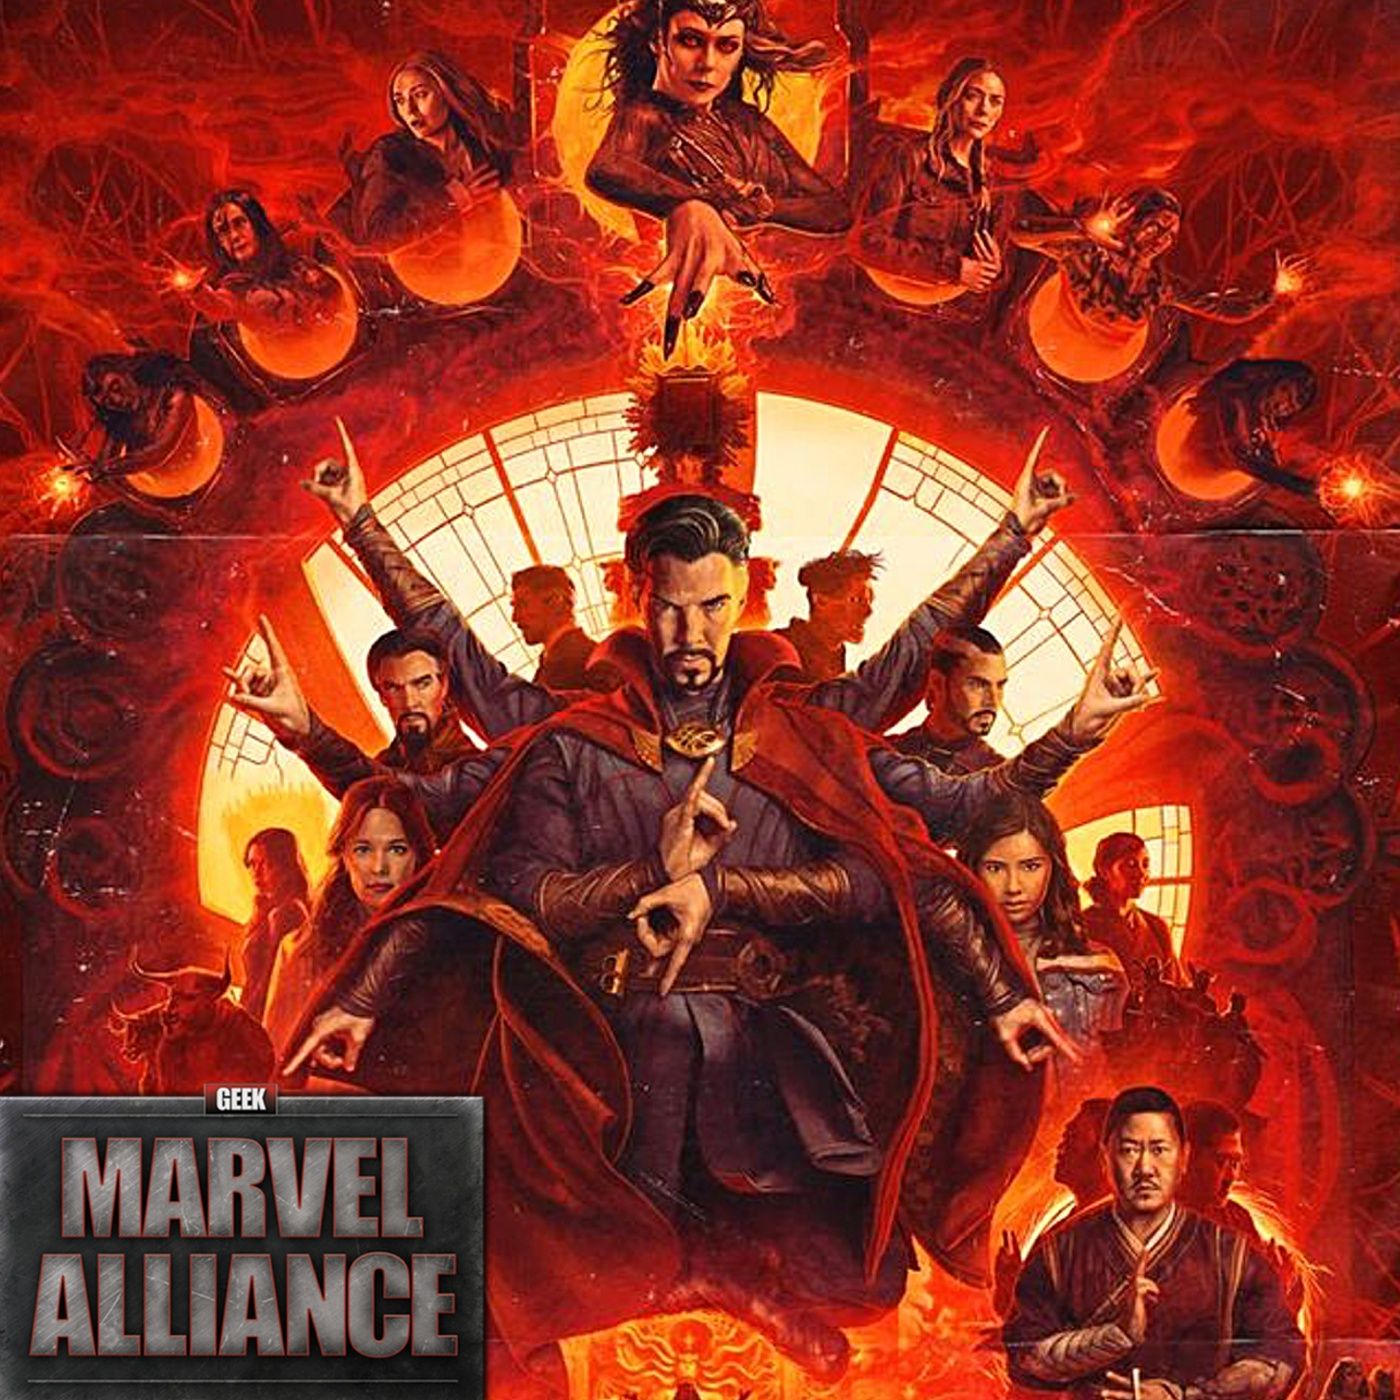 Doctor Strange In The Multiverse Of Madness Spoilers Review: Marvel Alliance Vol. 107